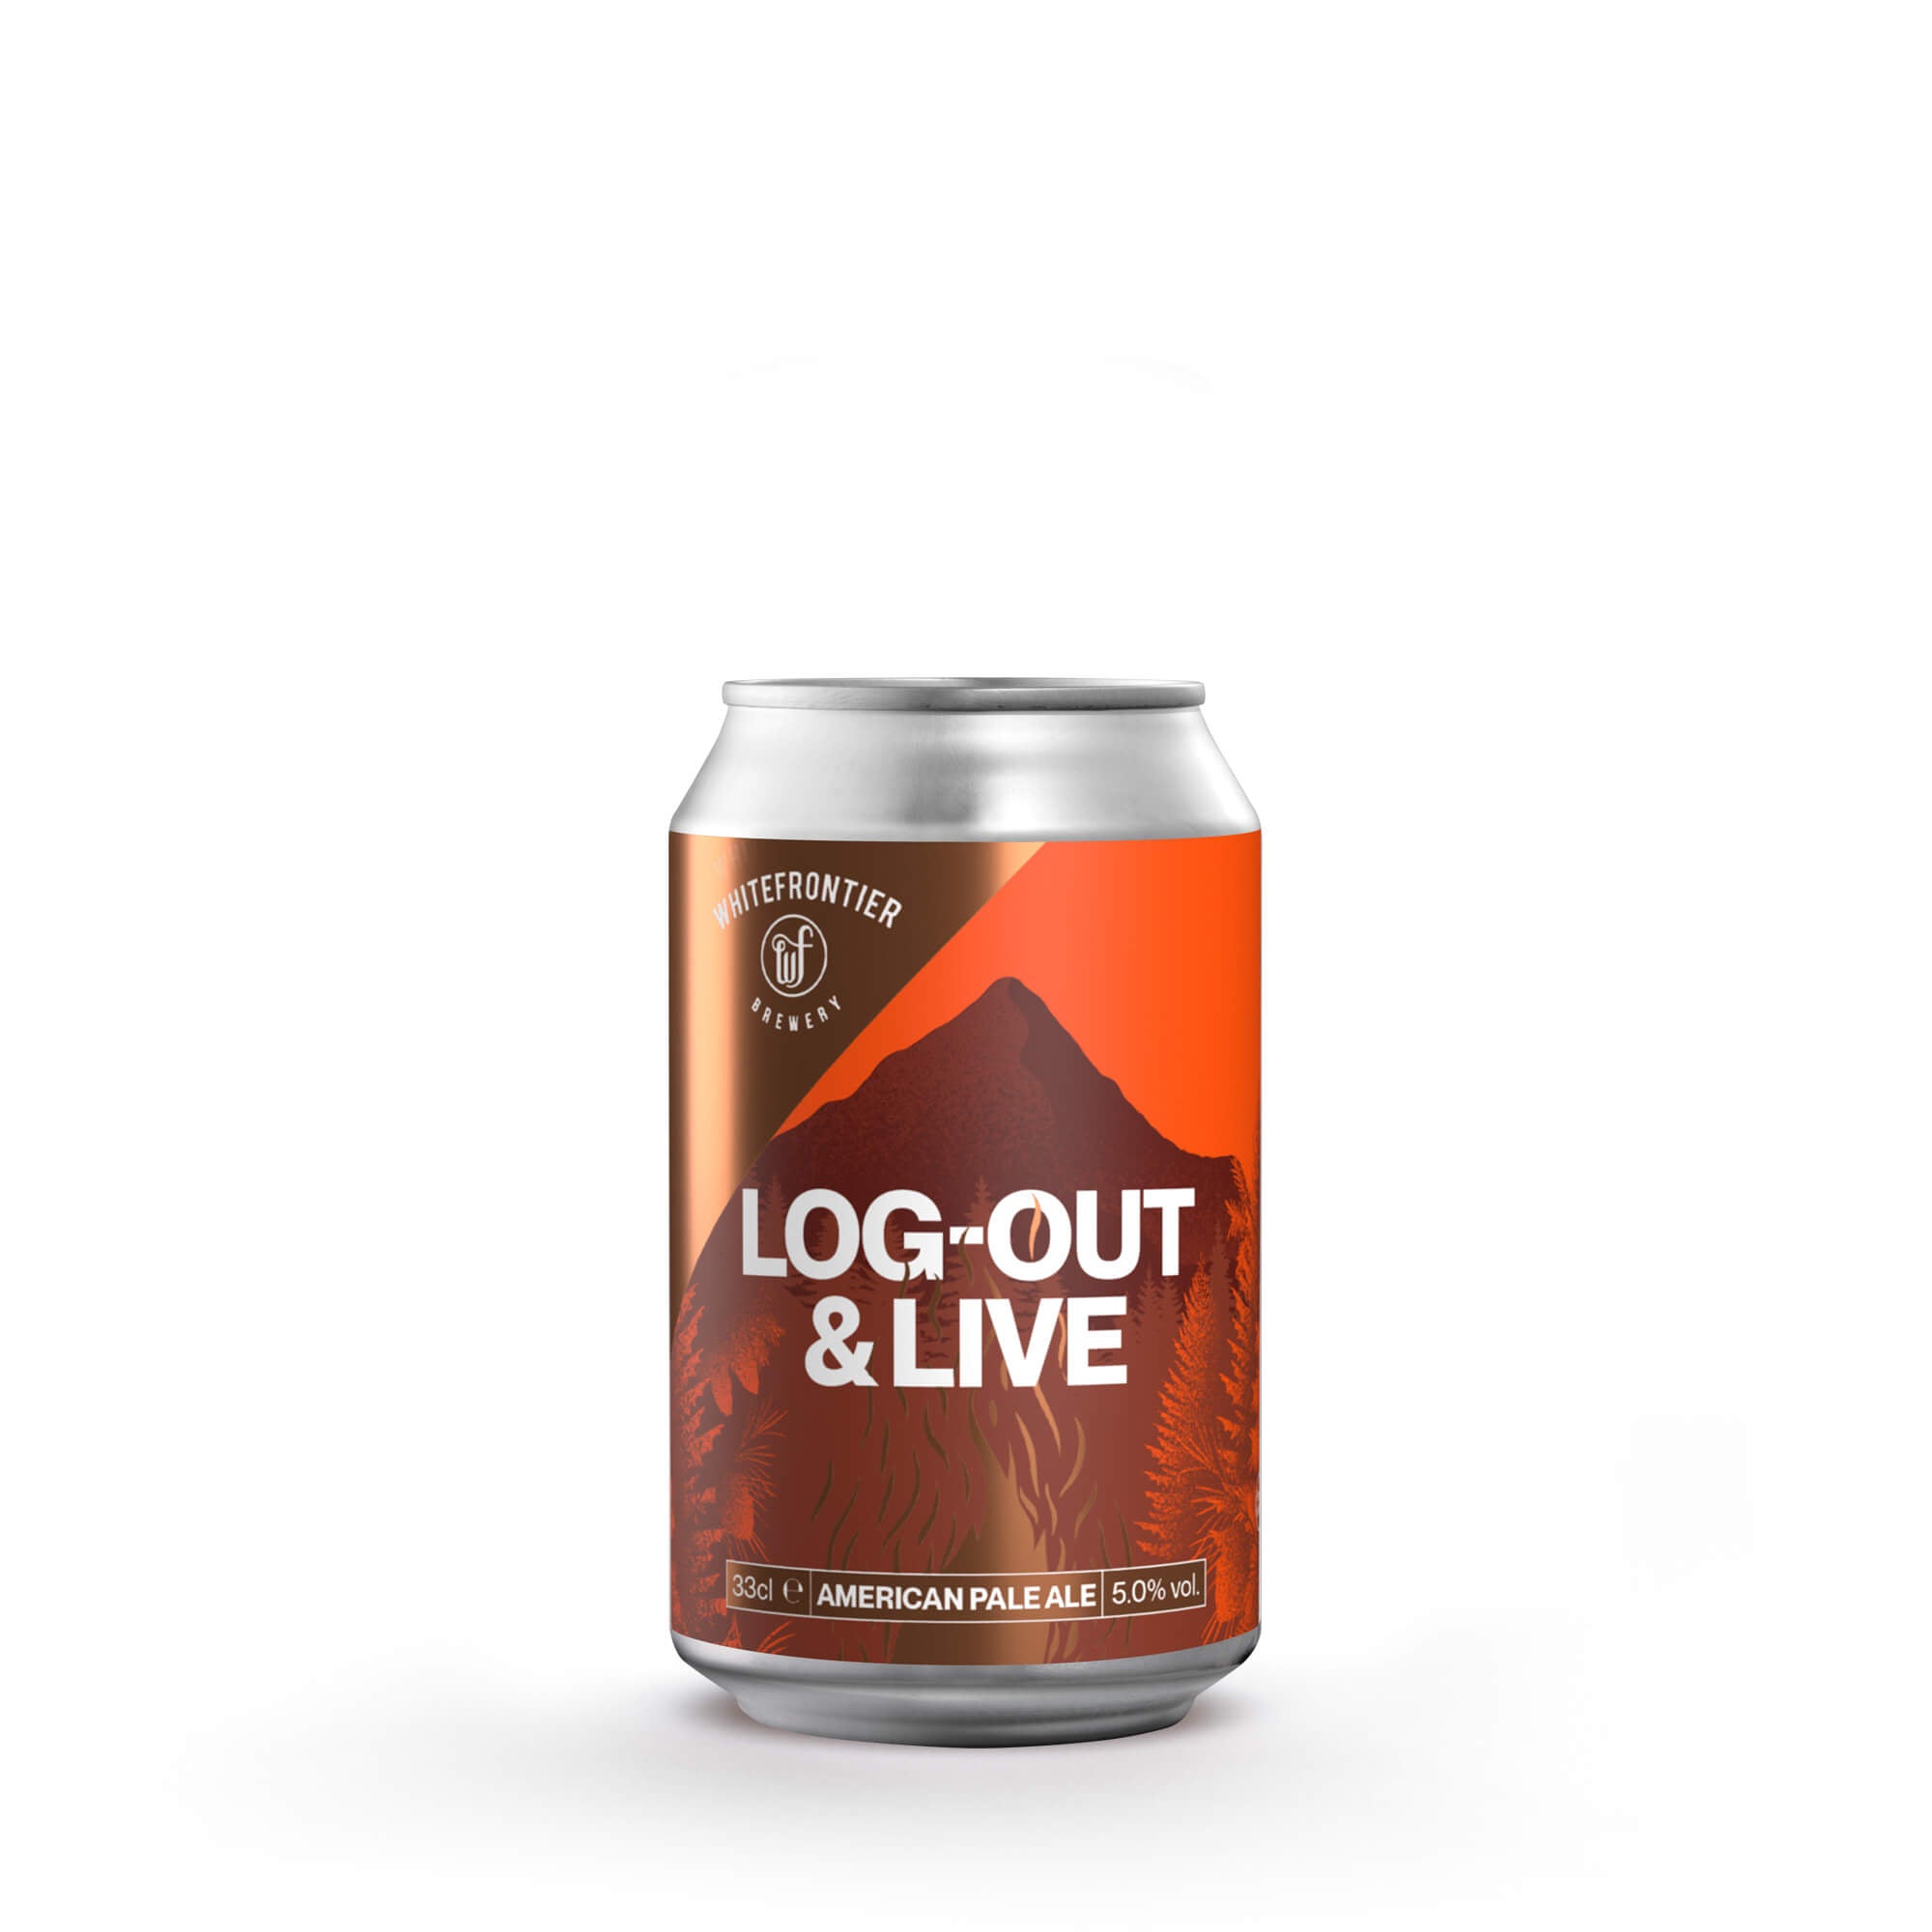 LOG-OUT & LIVE